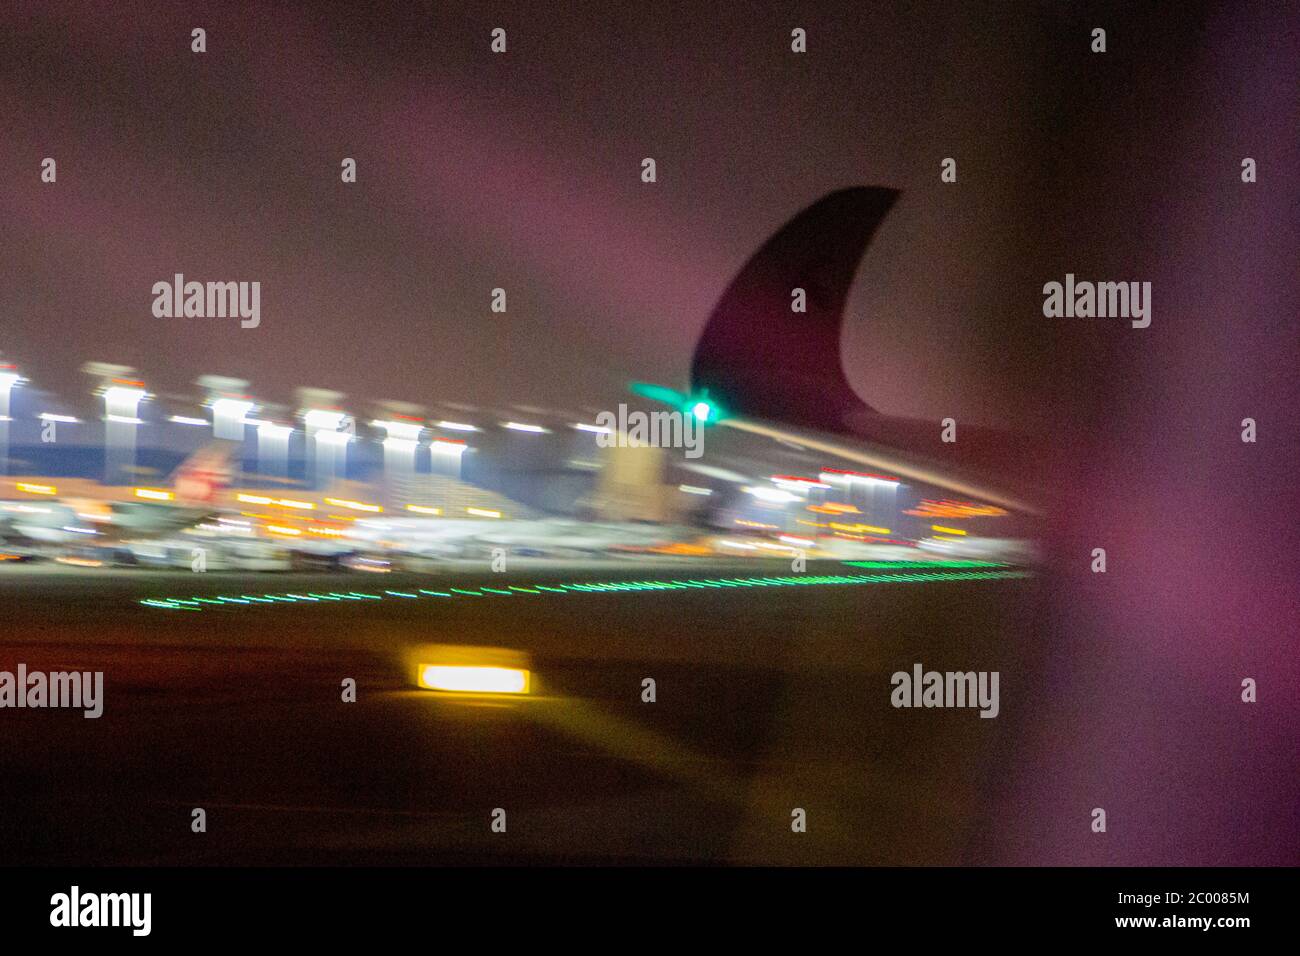 Flying into Doha International Airport during the lockdown caused by the COVID-19 virus. Worldwide, the air traffic industry is heavily impacted by the massive drop in traffic. Stock Photo